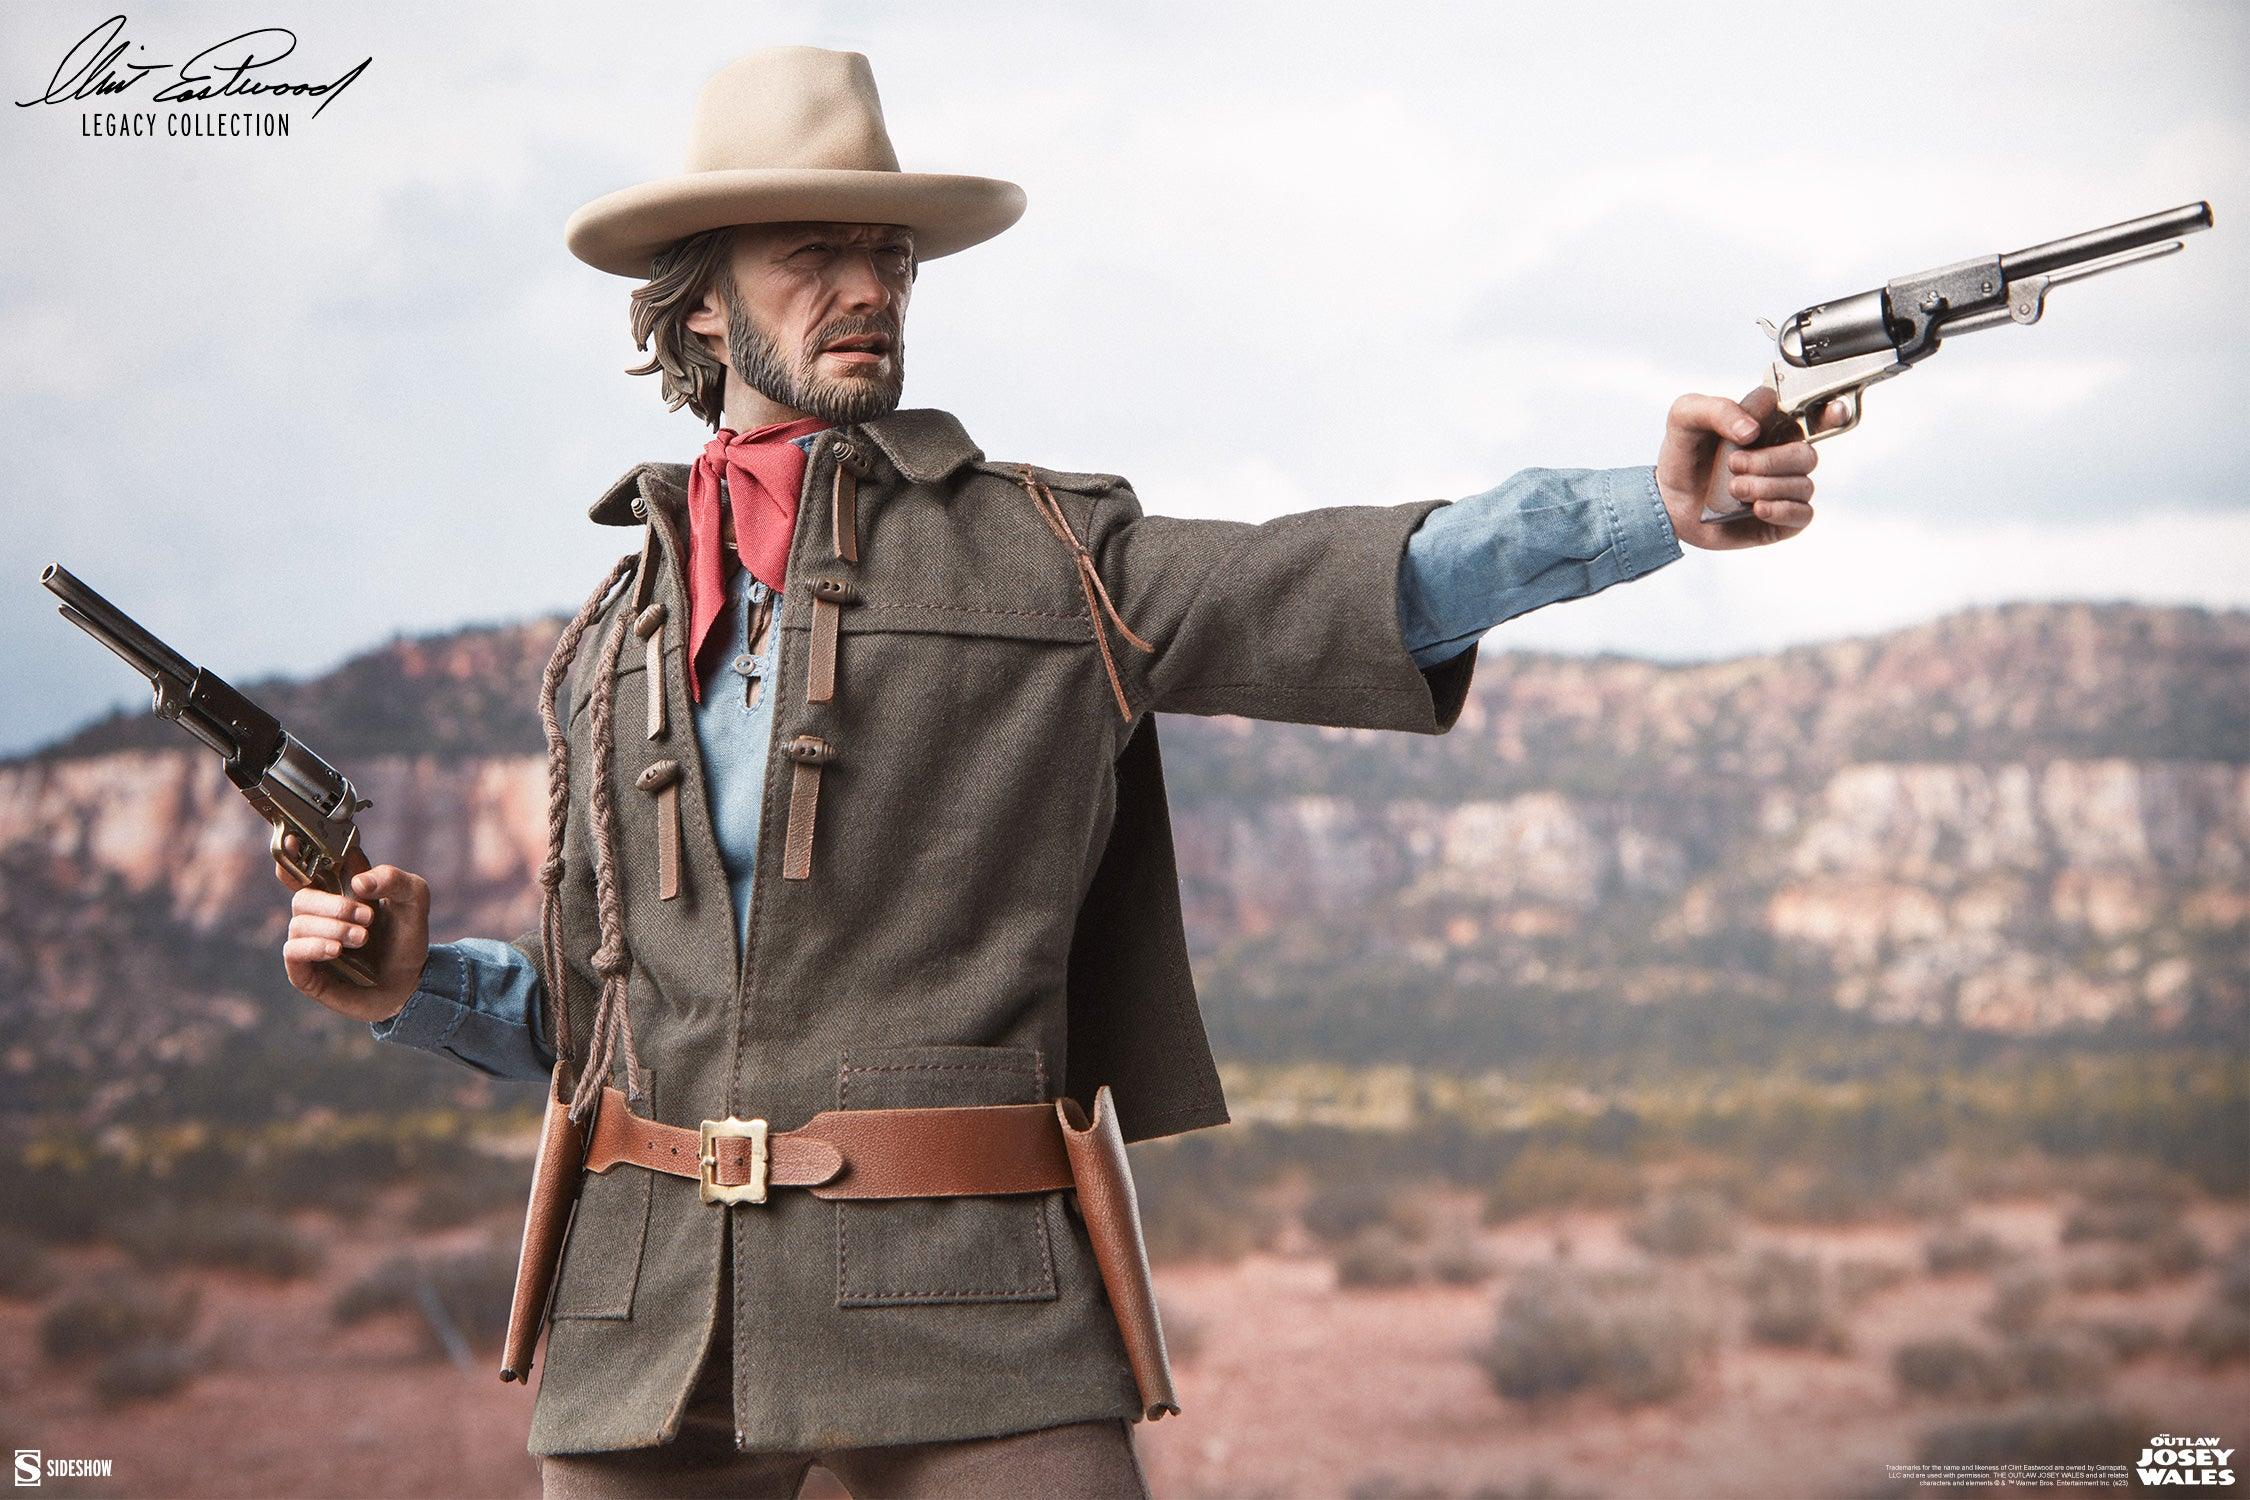 SID100454 Clint Eastwood - The Outlaw Josey Wales 1:6 Scale Action Figure - Sideshow Collectibles - Titan Pop Culture